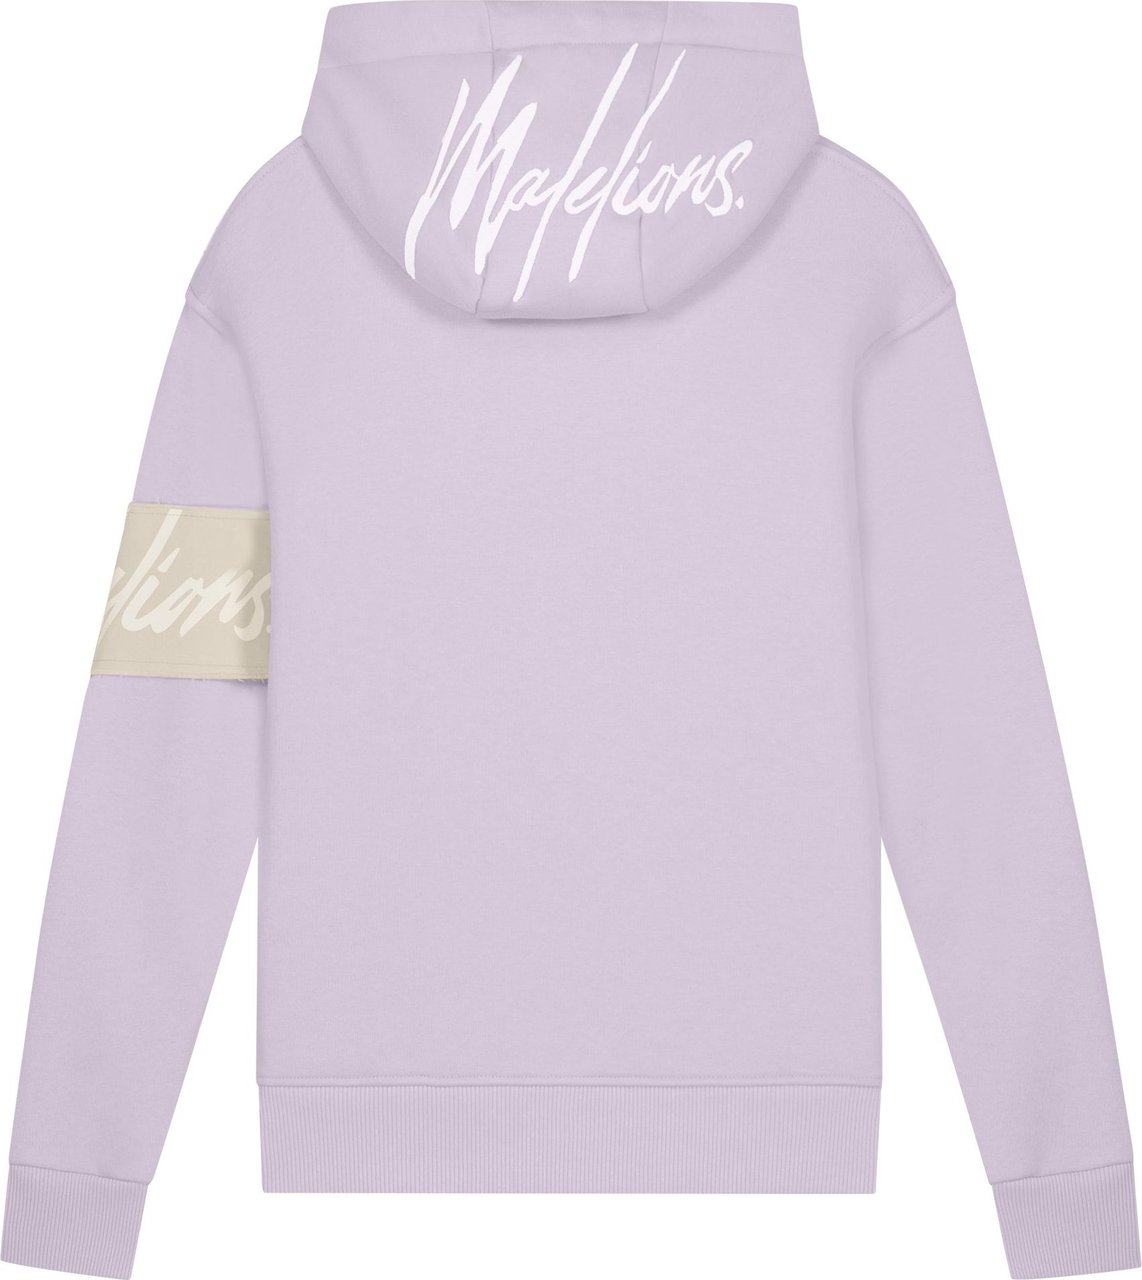 Malelions Captain Hoodie - Thistle Lilac Paars